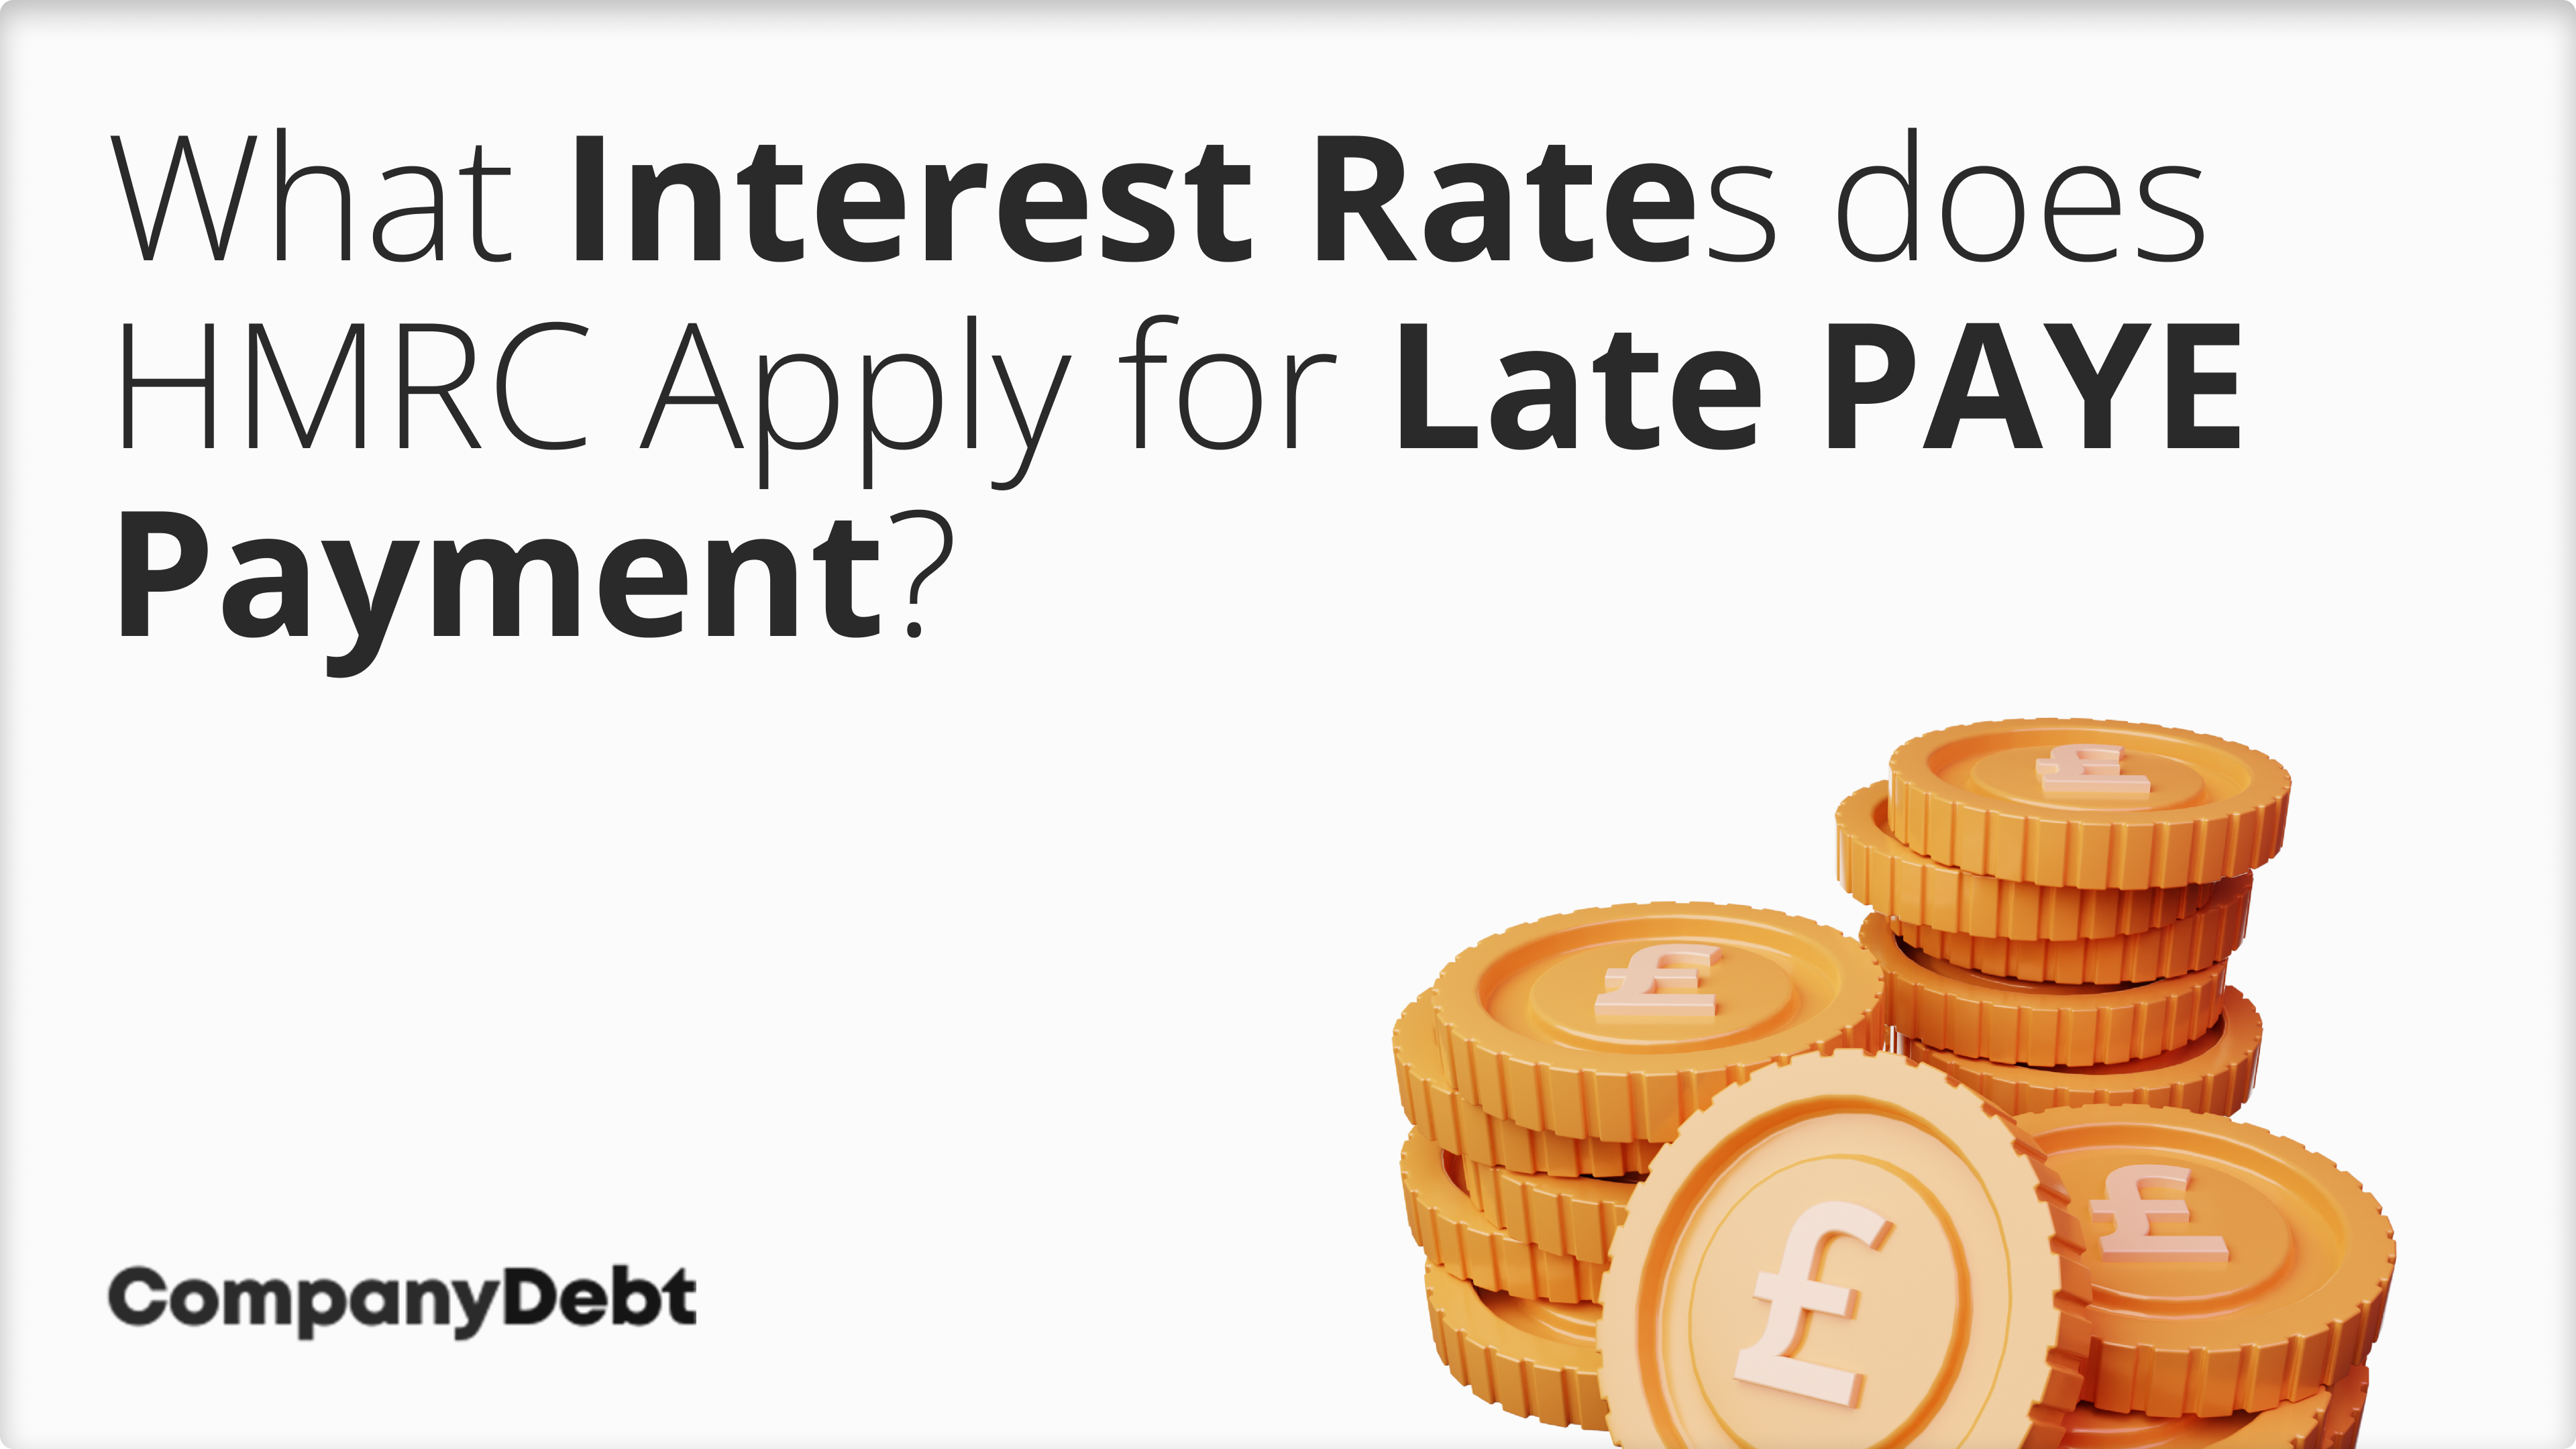 What Interest Rates does HMRC Apply for late PAYE Payment?